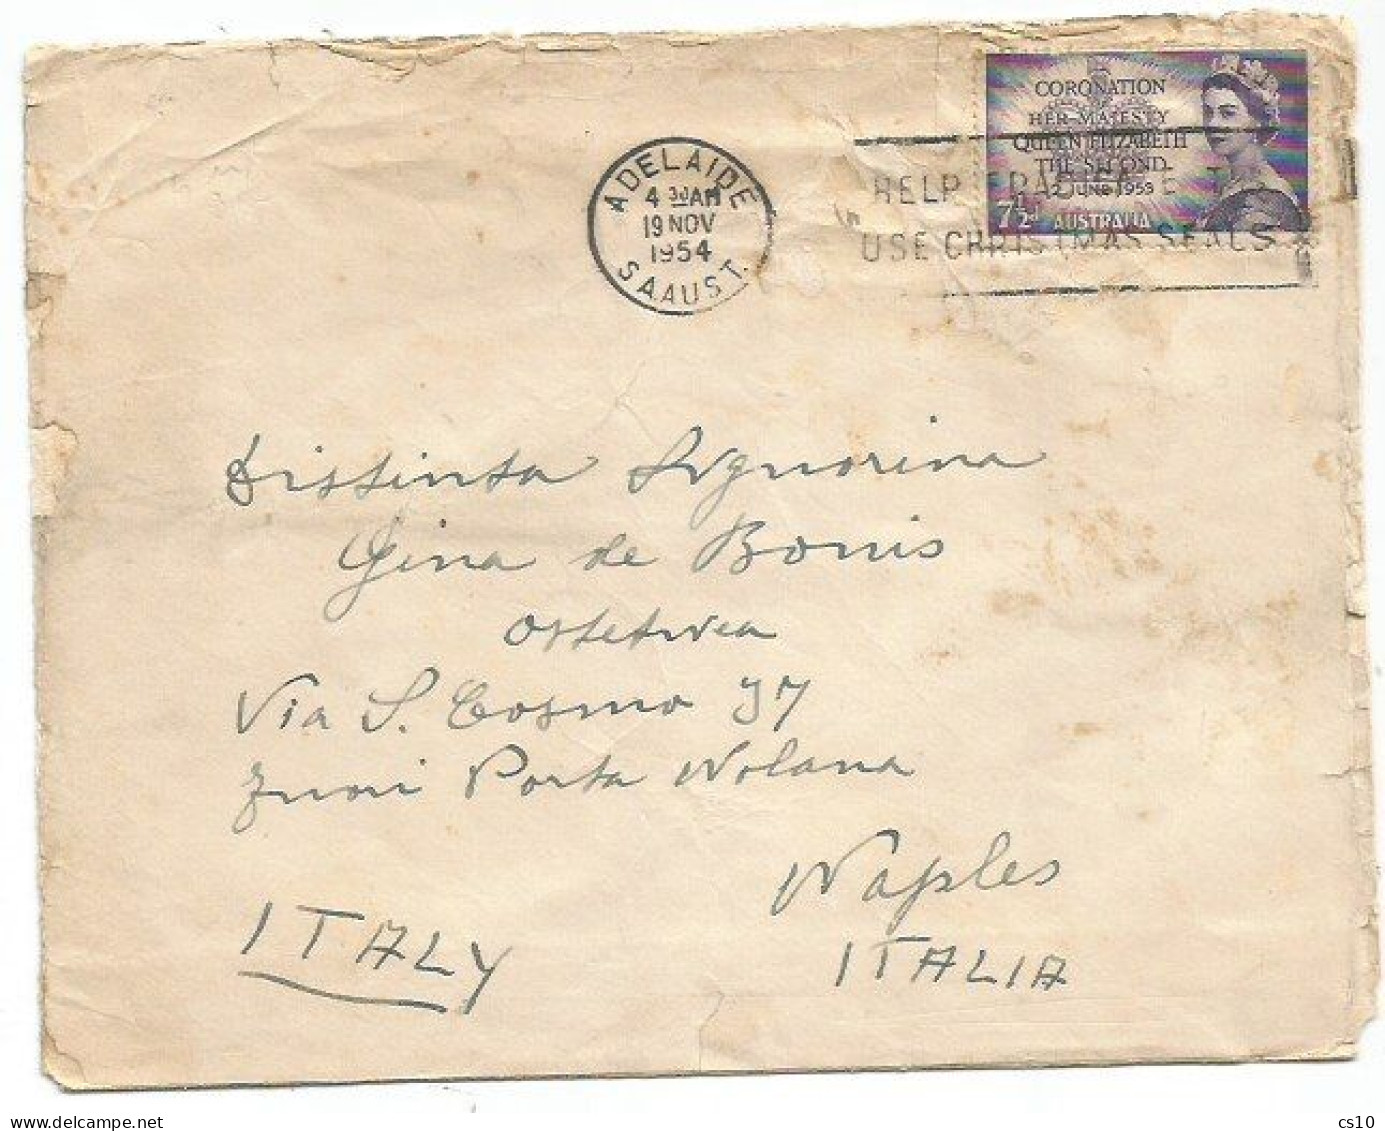 Australia Coronation Day 1953 D.7.1/2 Solo Franking AirmailCV Adelaide 19nov1954 To Italy - Covers & Documents